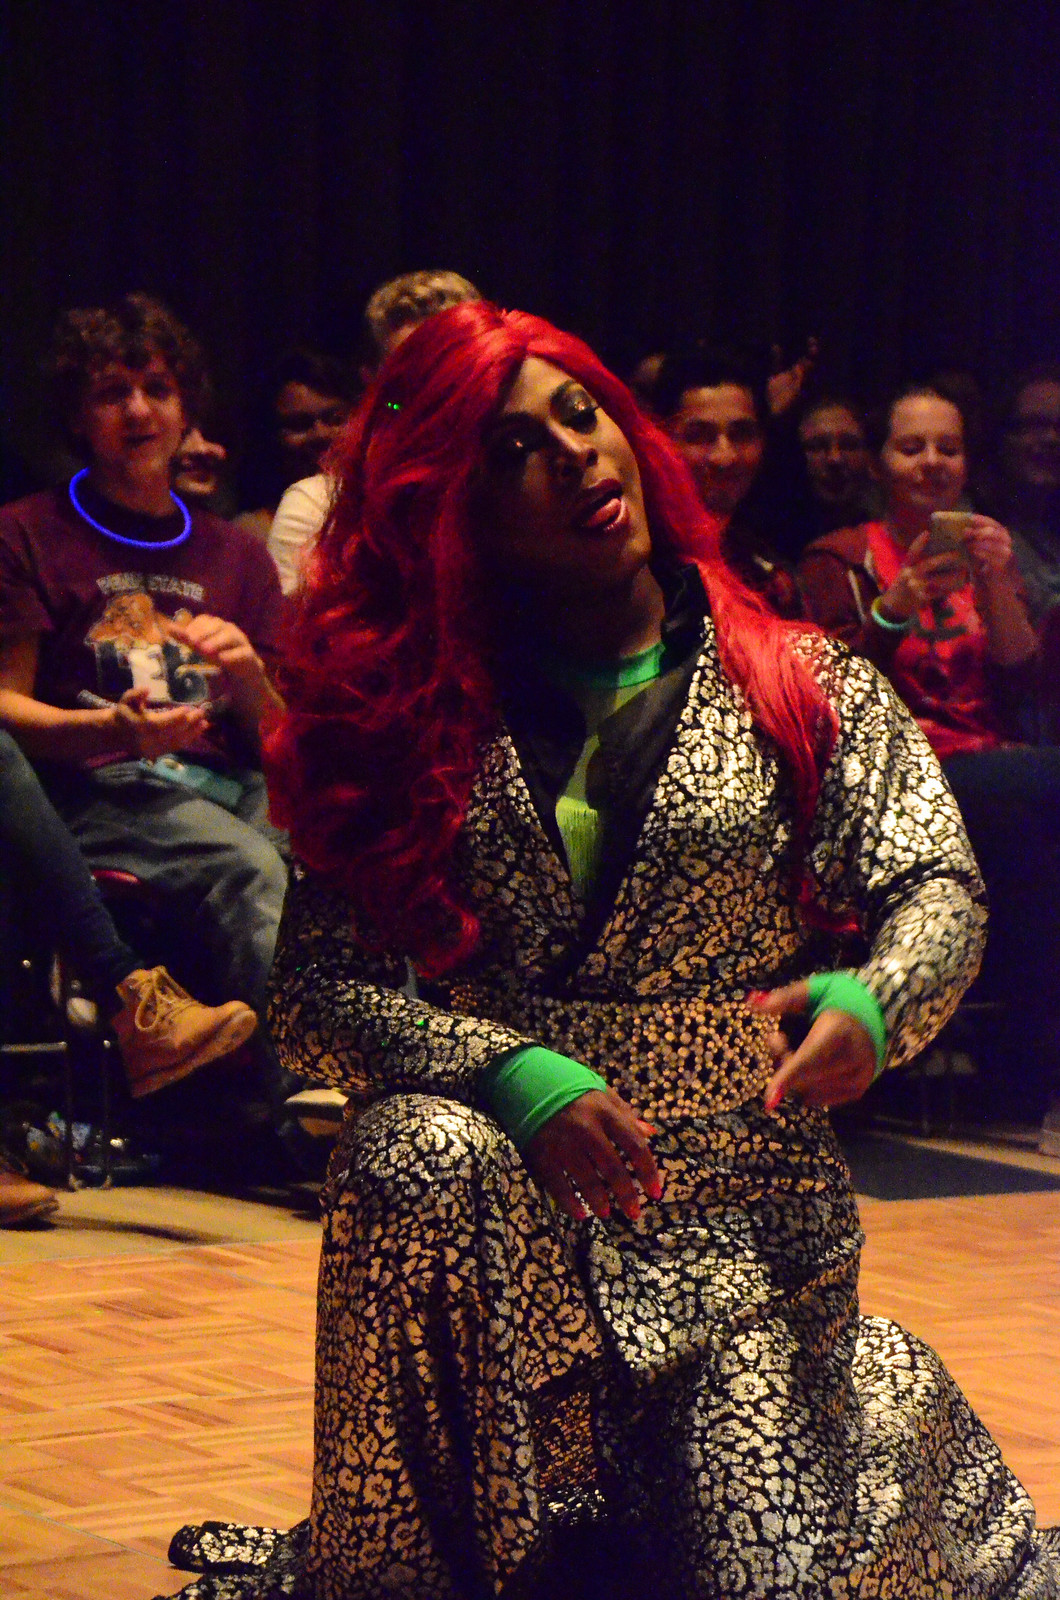 On November 2, 2016, Trigon, Penn State Univerosty-Behrend's LGBTQ student group, again held their annual Drag Show in the Reed Union Building. Thev event was very well attended and there was also an amateur drag competition.